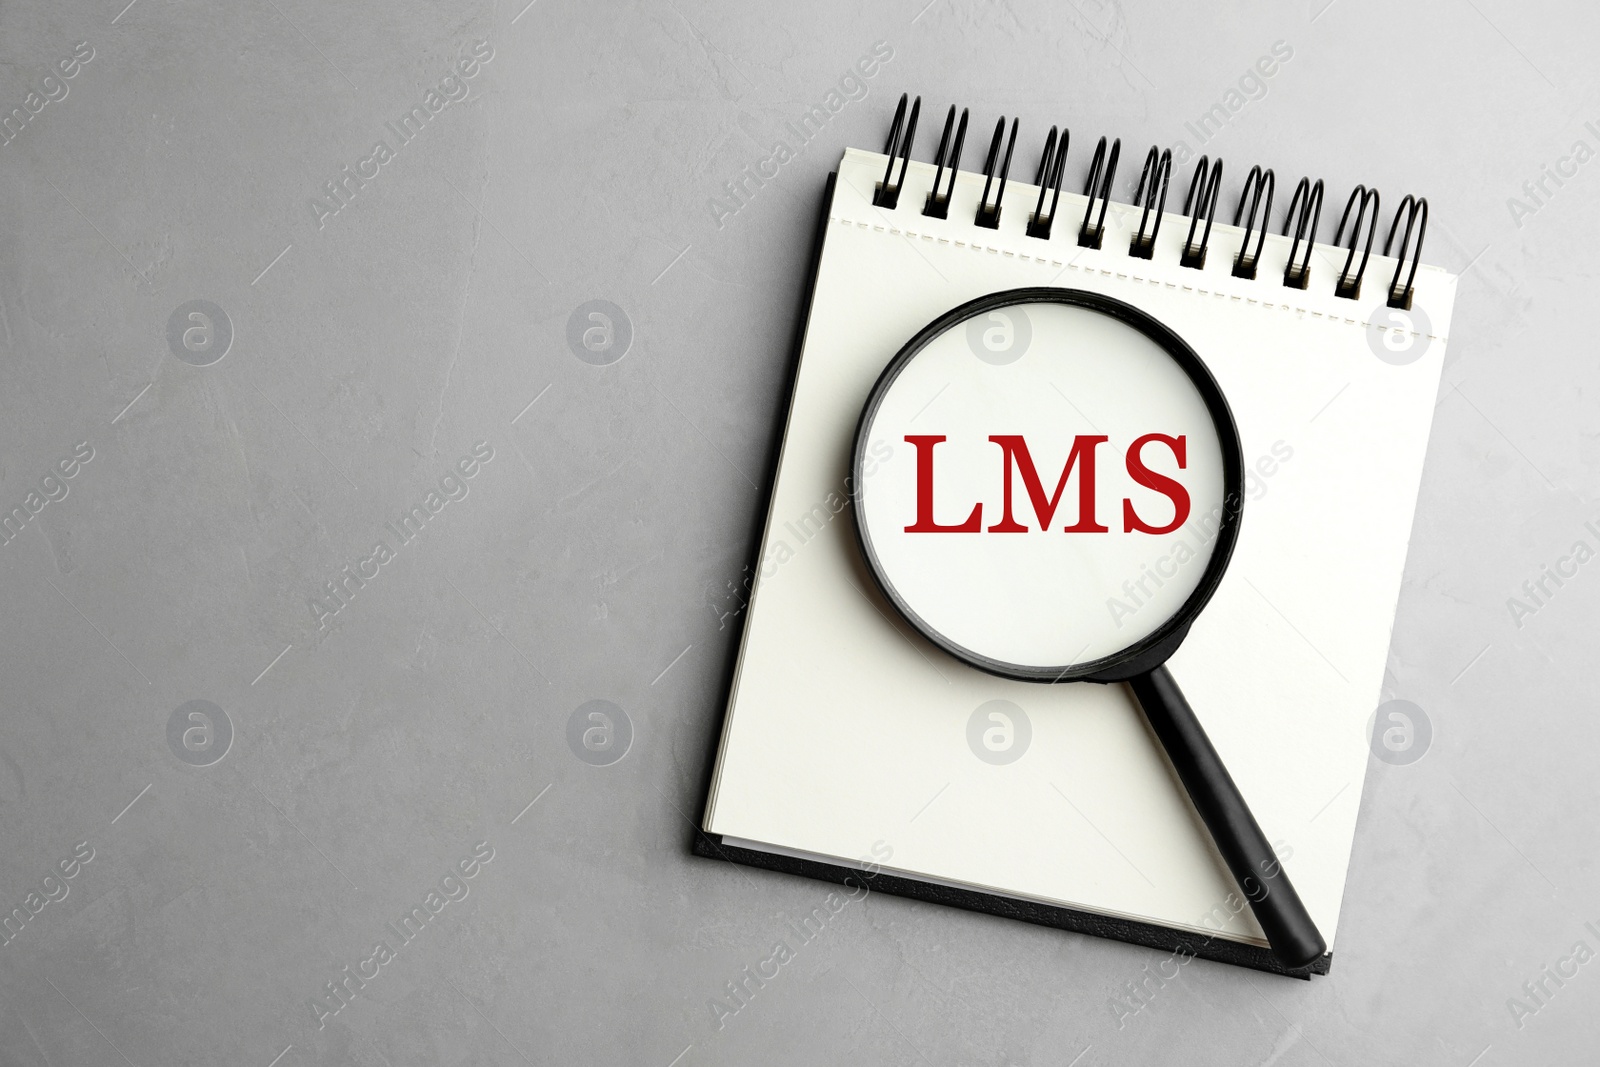 Image of Learning Management System. Notebook with abbreviation LMS and magnifying glass on light background, top view